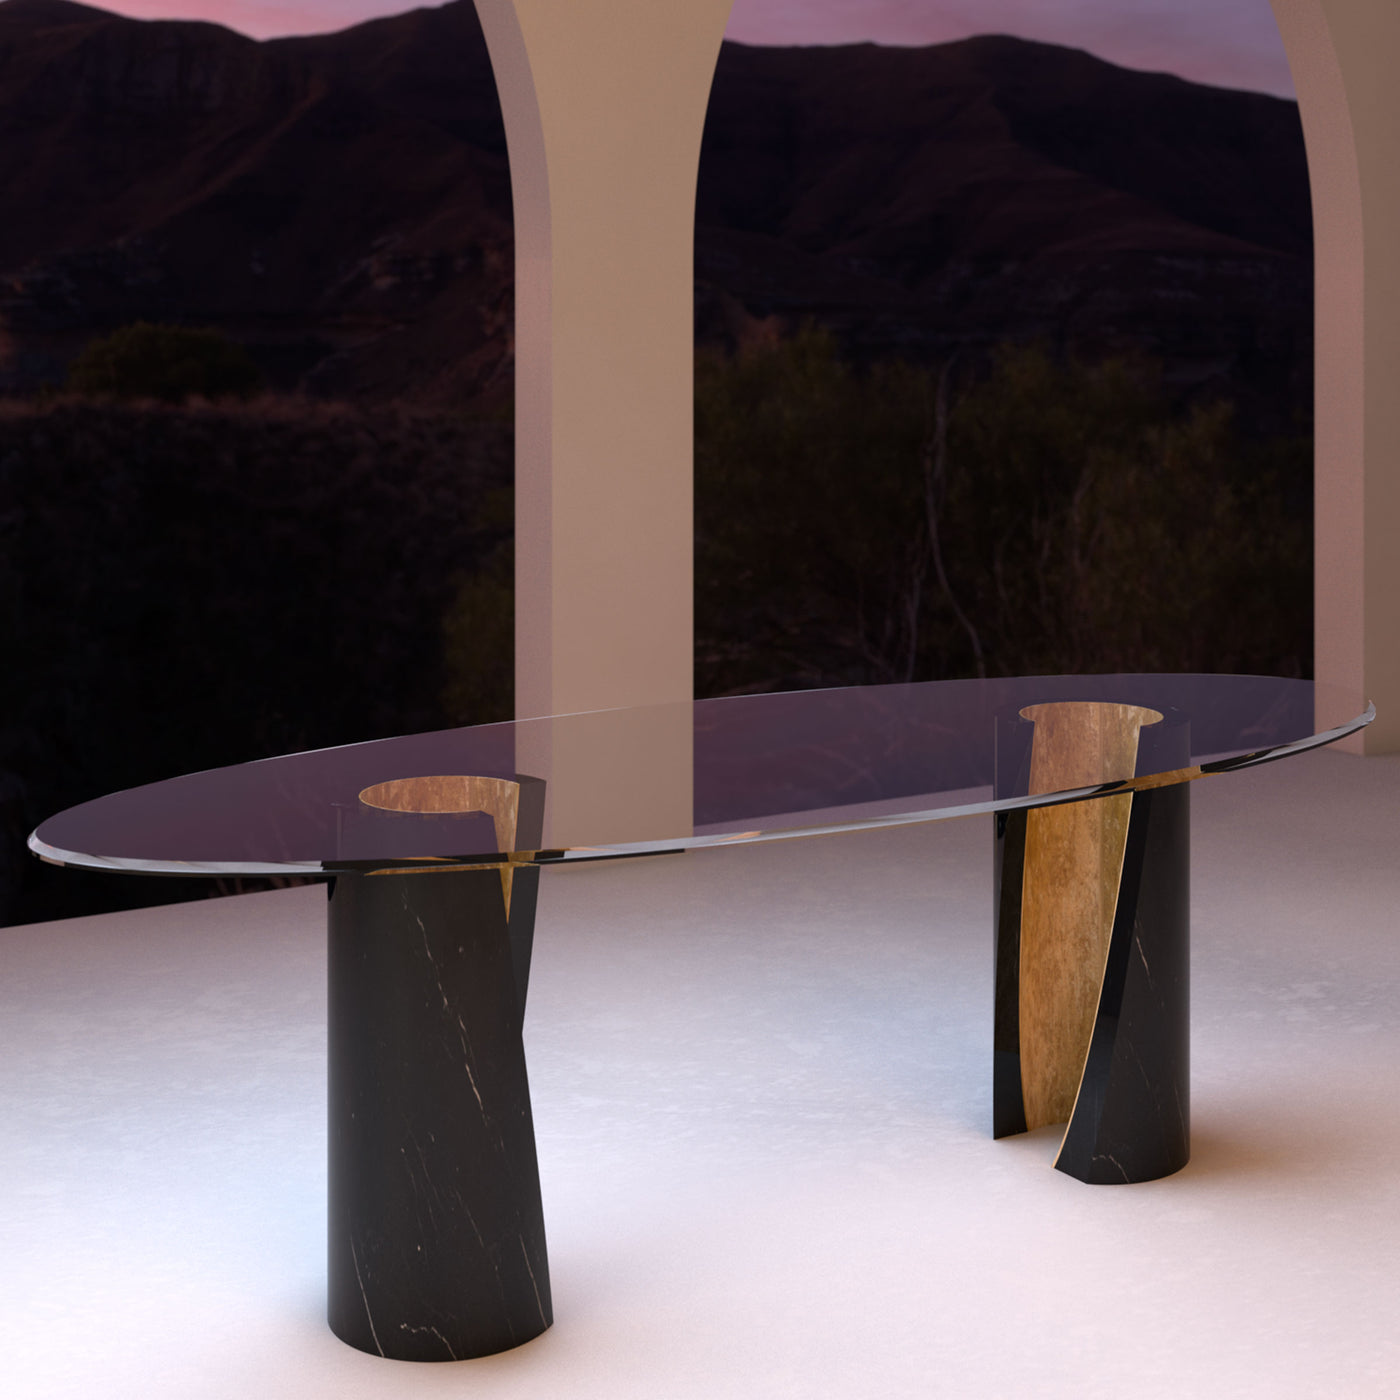 Marble and Crystal Dining Table ASYMMETRIC by Nicola Di Froscia for DFdesignLab 01